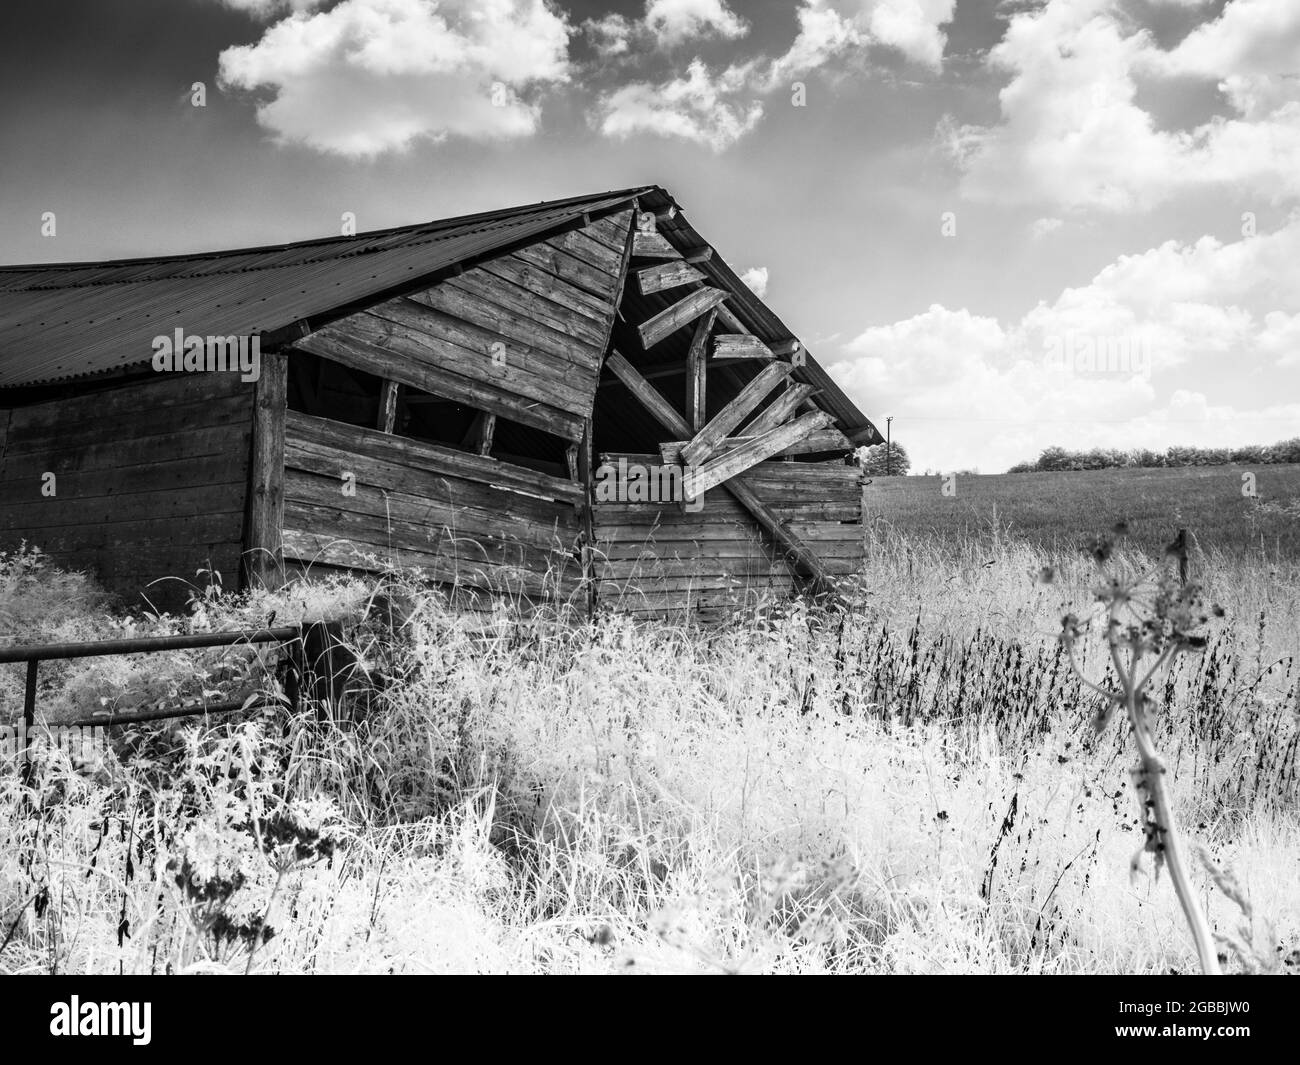 A dilapidated barn on the edge of a field, shot in infrared. Stock Photo